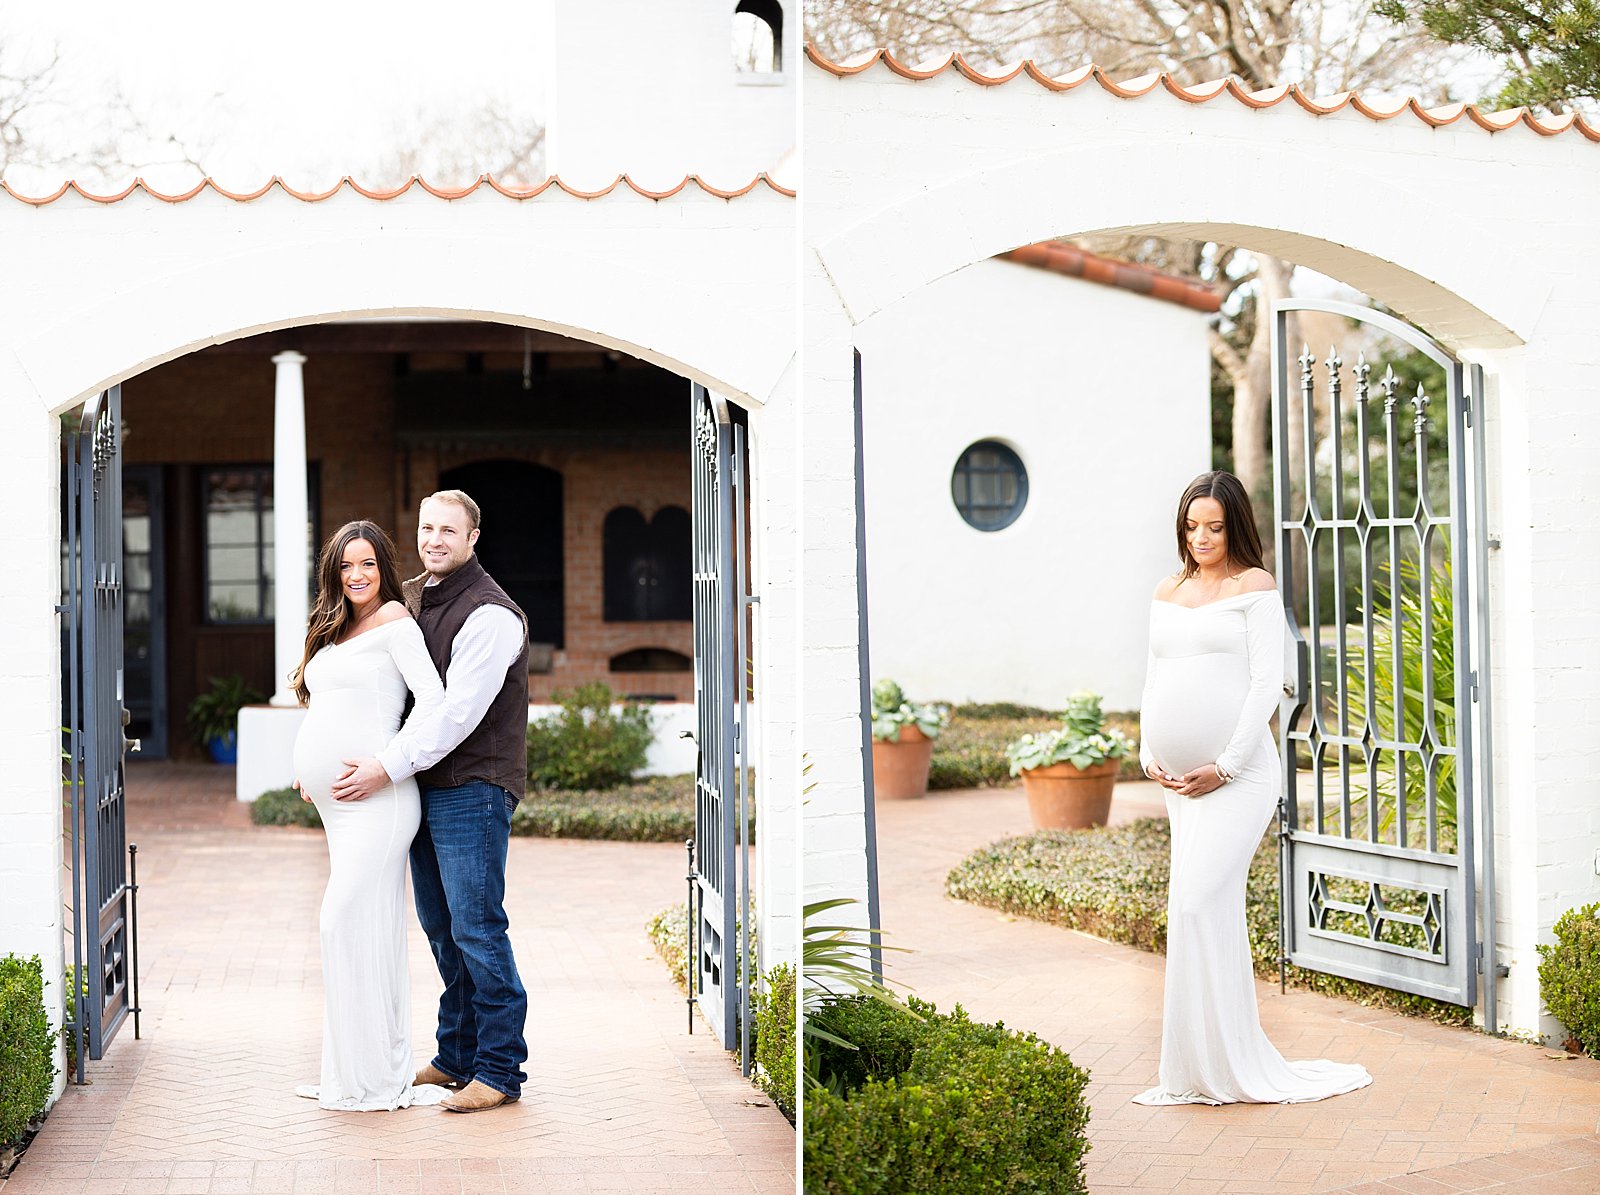 Texas maternity session at Dallas Arboretum with Randi Michelle Photography